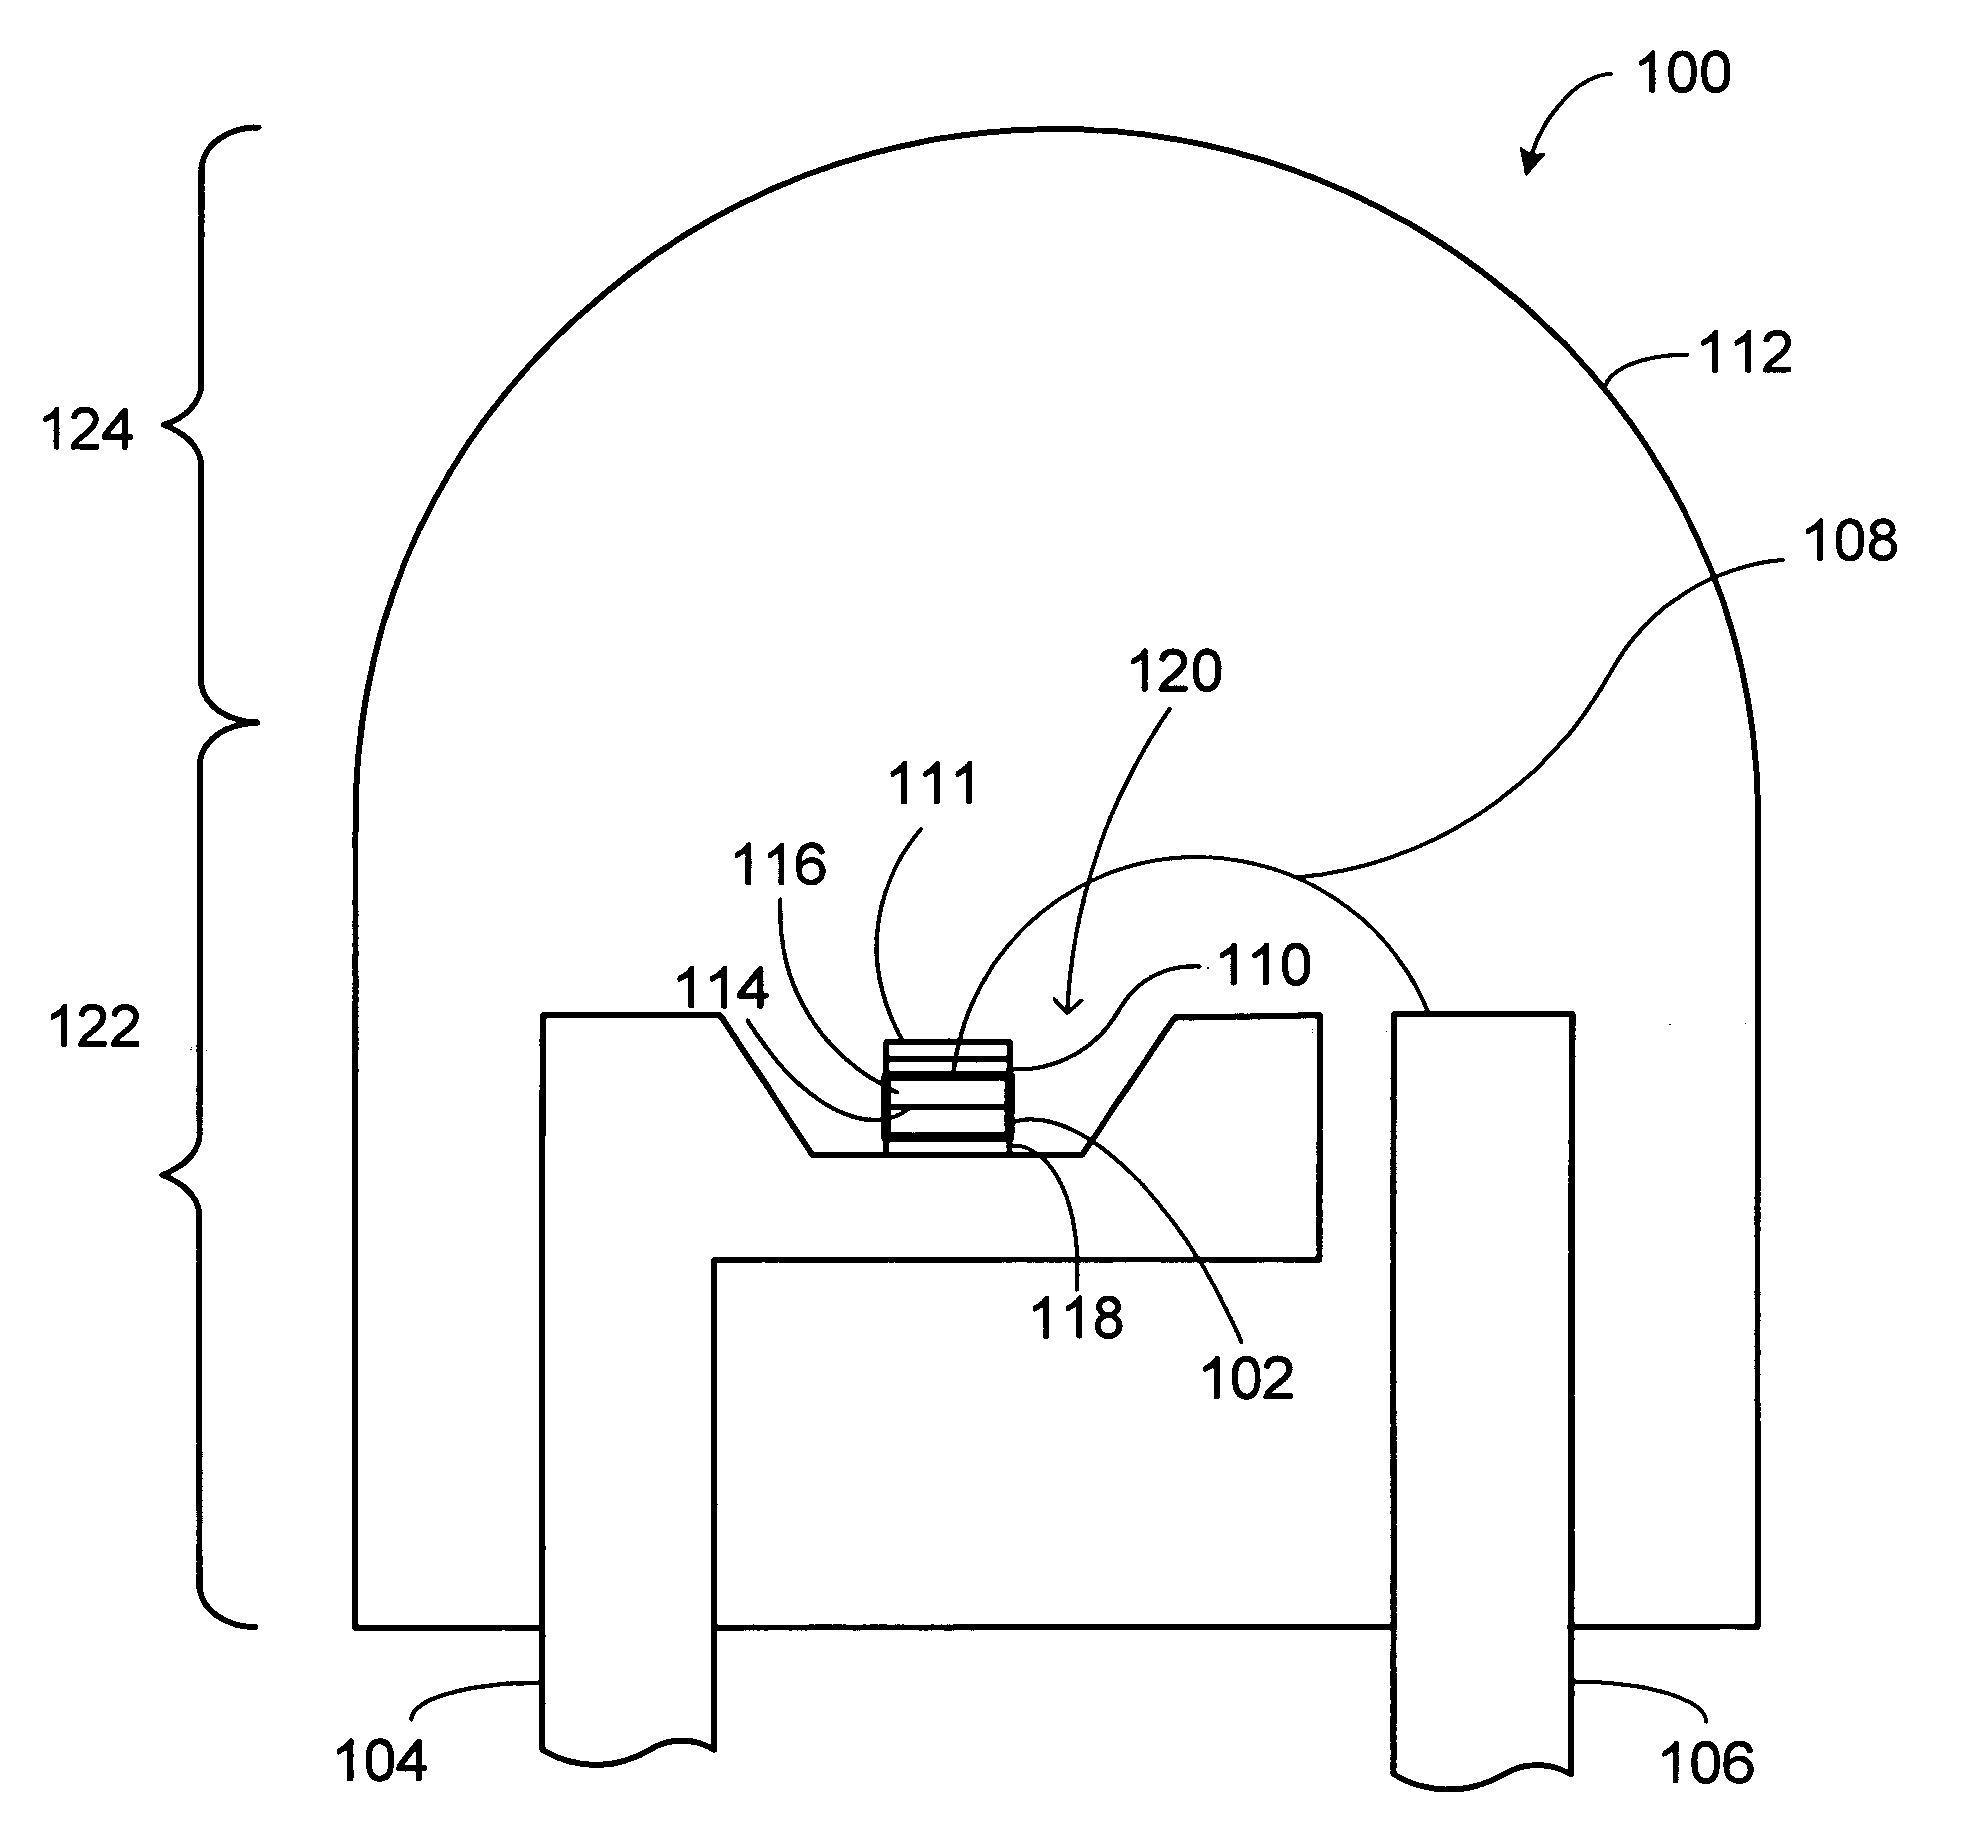 Light emitting device having a layer of photonic crystals and a region of diffusing material and method for fabricating the device